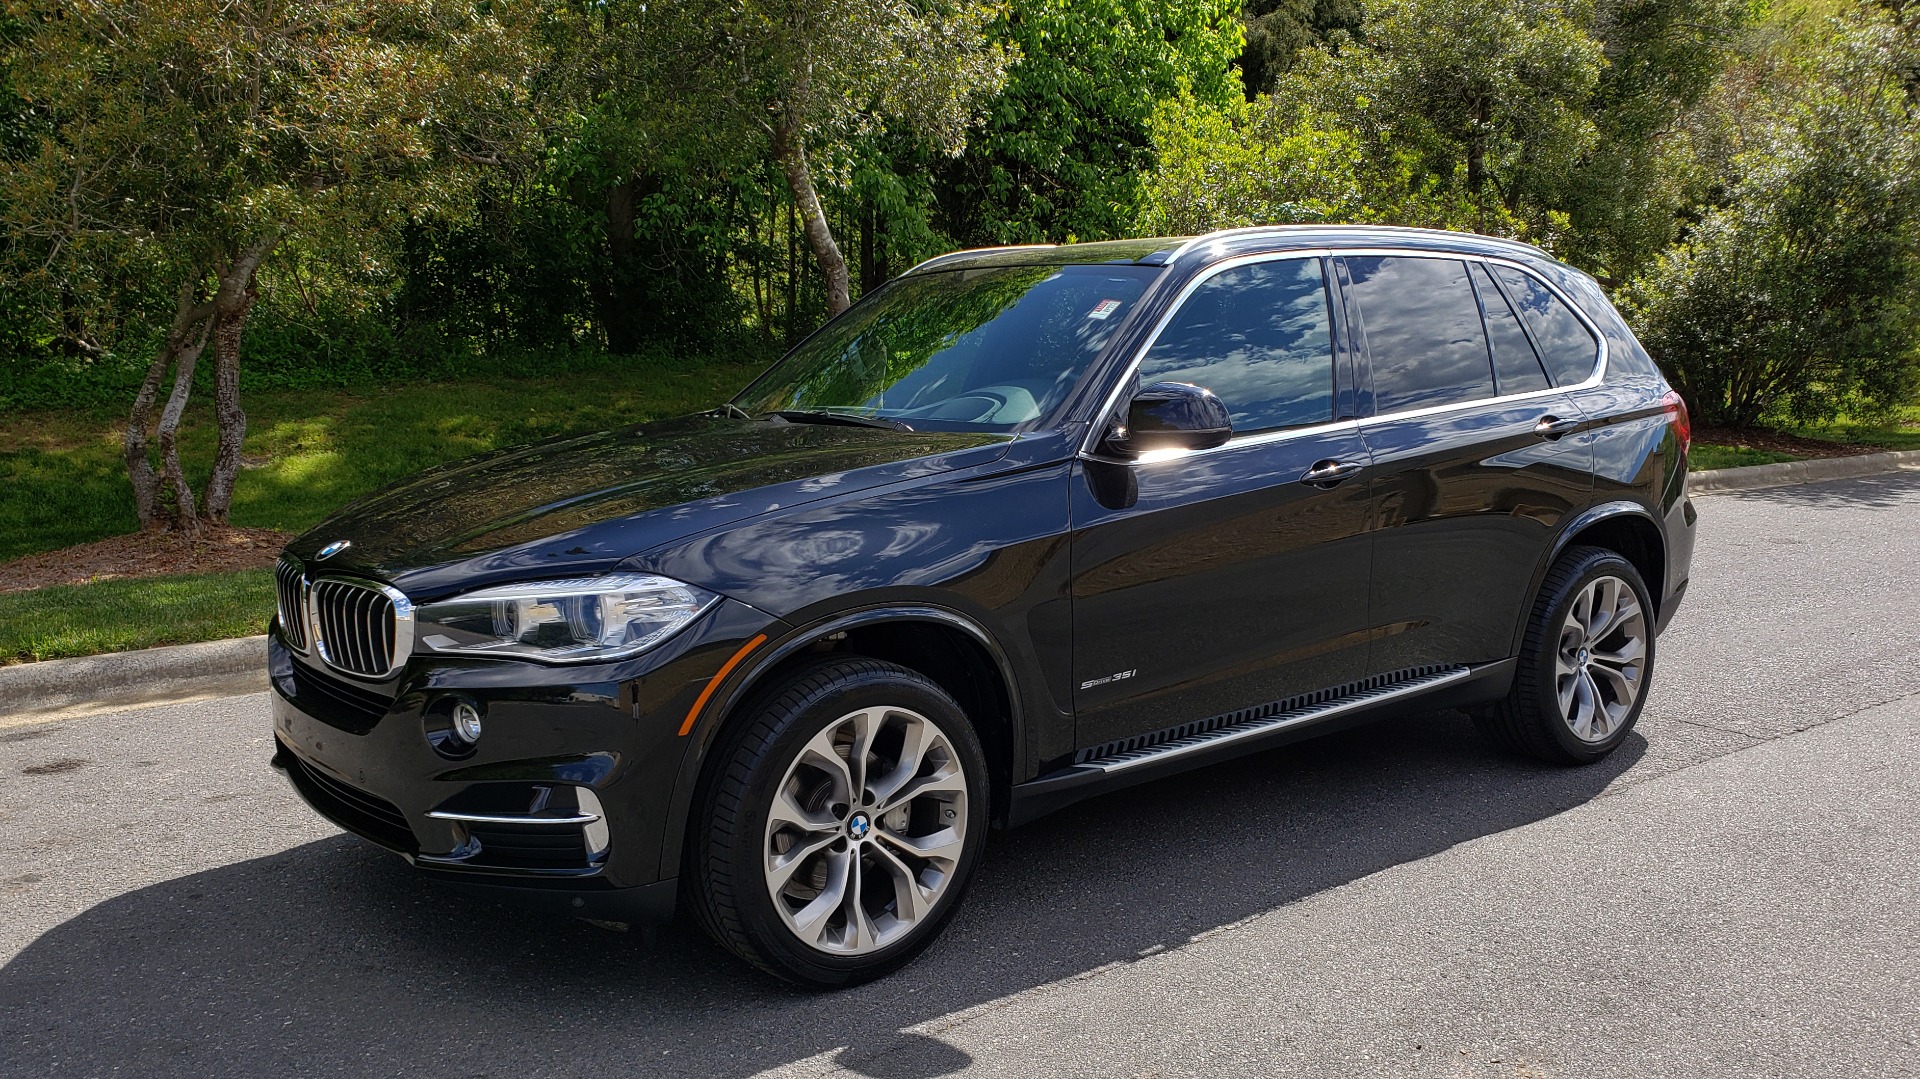 Used 2017 BMW X5 SDRIVE35I LUXURY / DRVR ASST / NAV / SUNROOF / REARVIEW for sale Sold at Formula Imports in Charlotte NC 28227 1